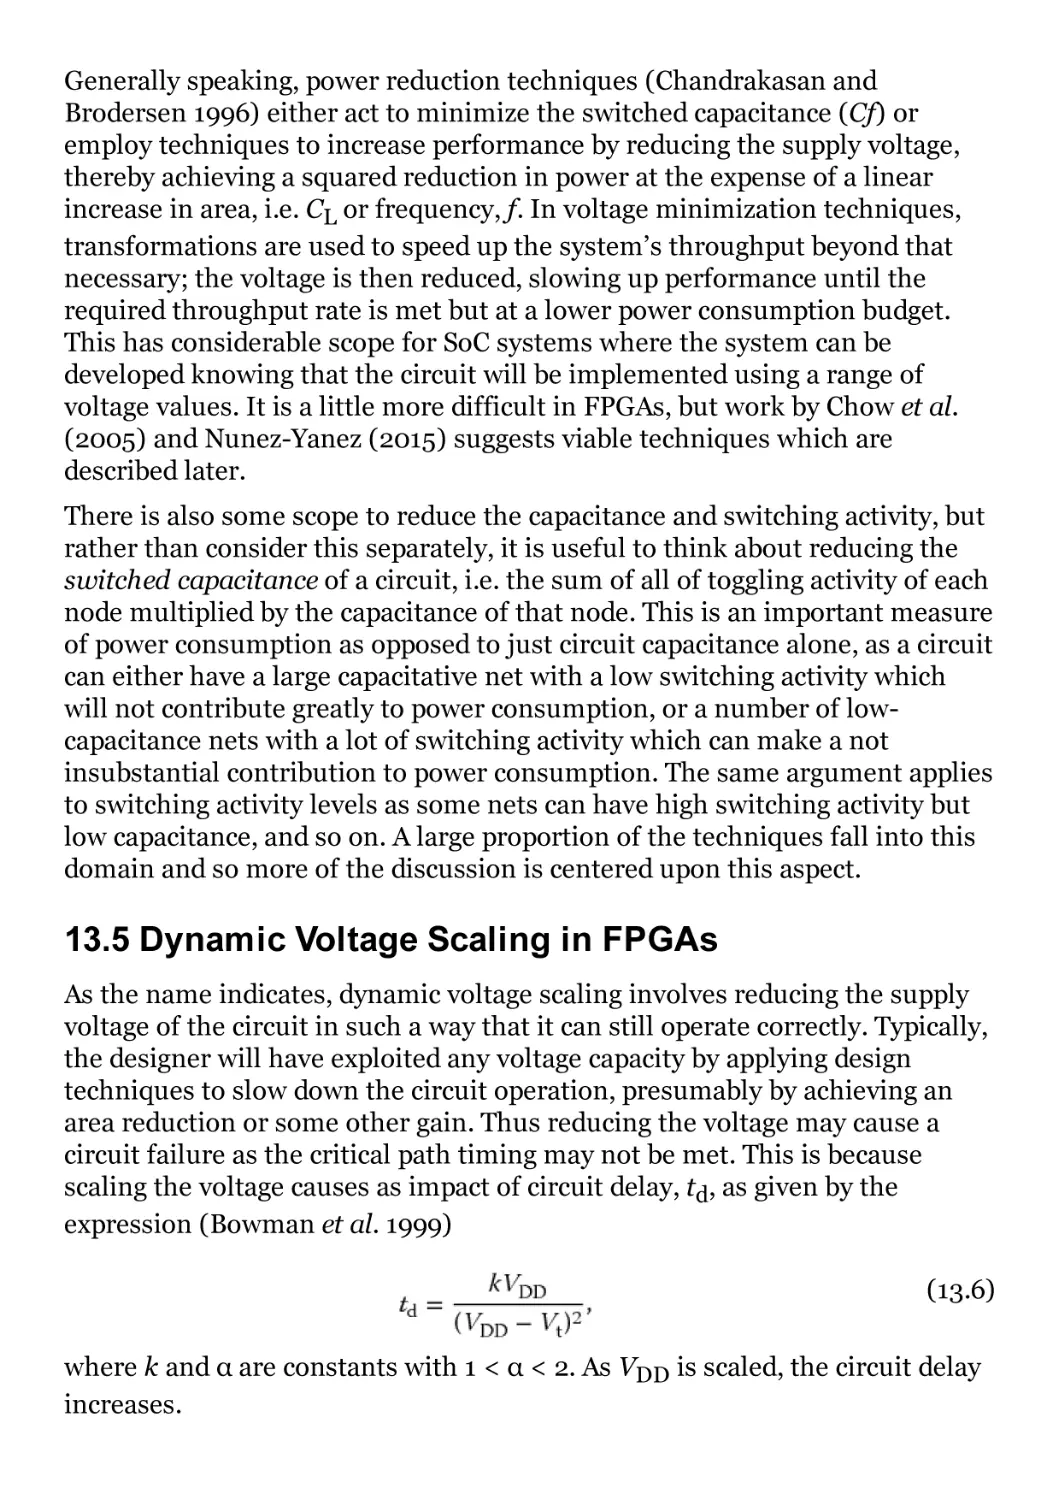 13.5 Dynamic Voltage Scaling in FPGAs